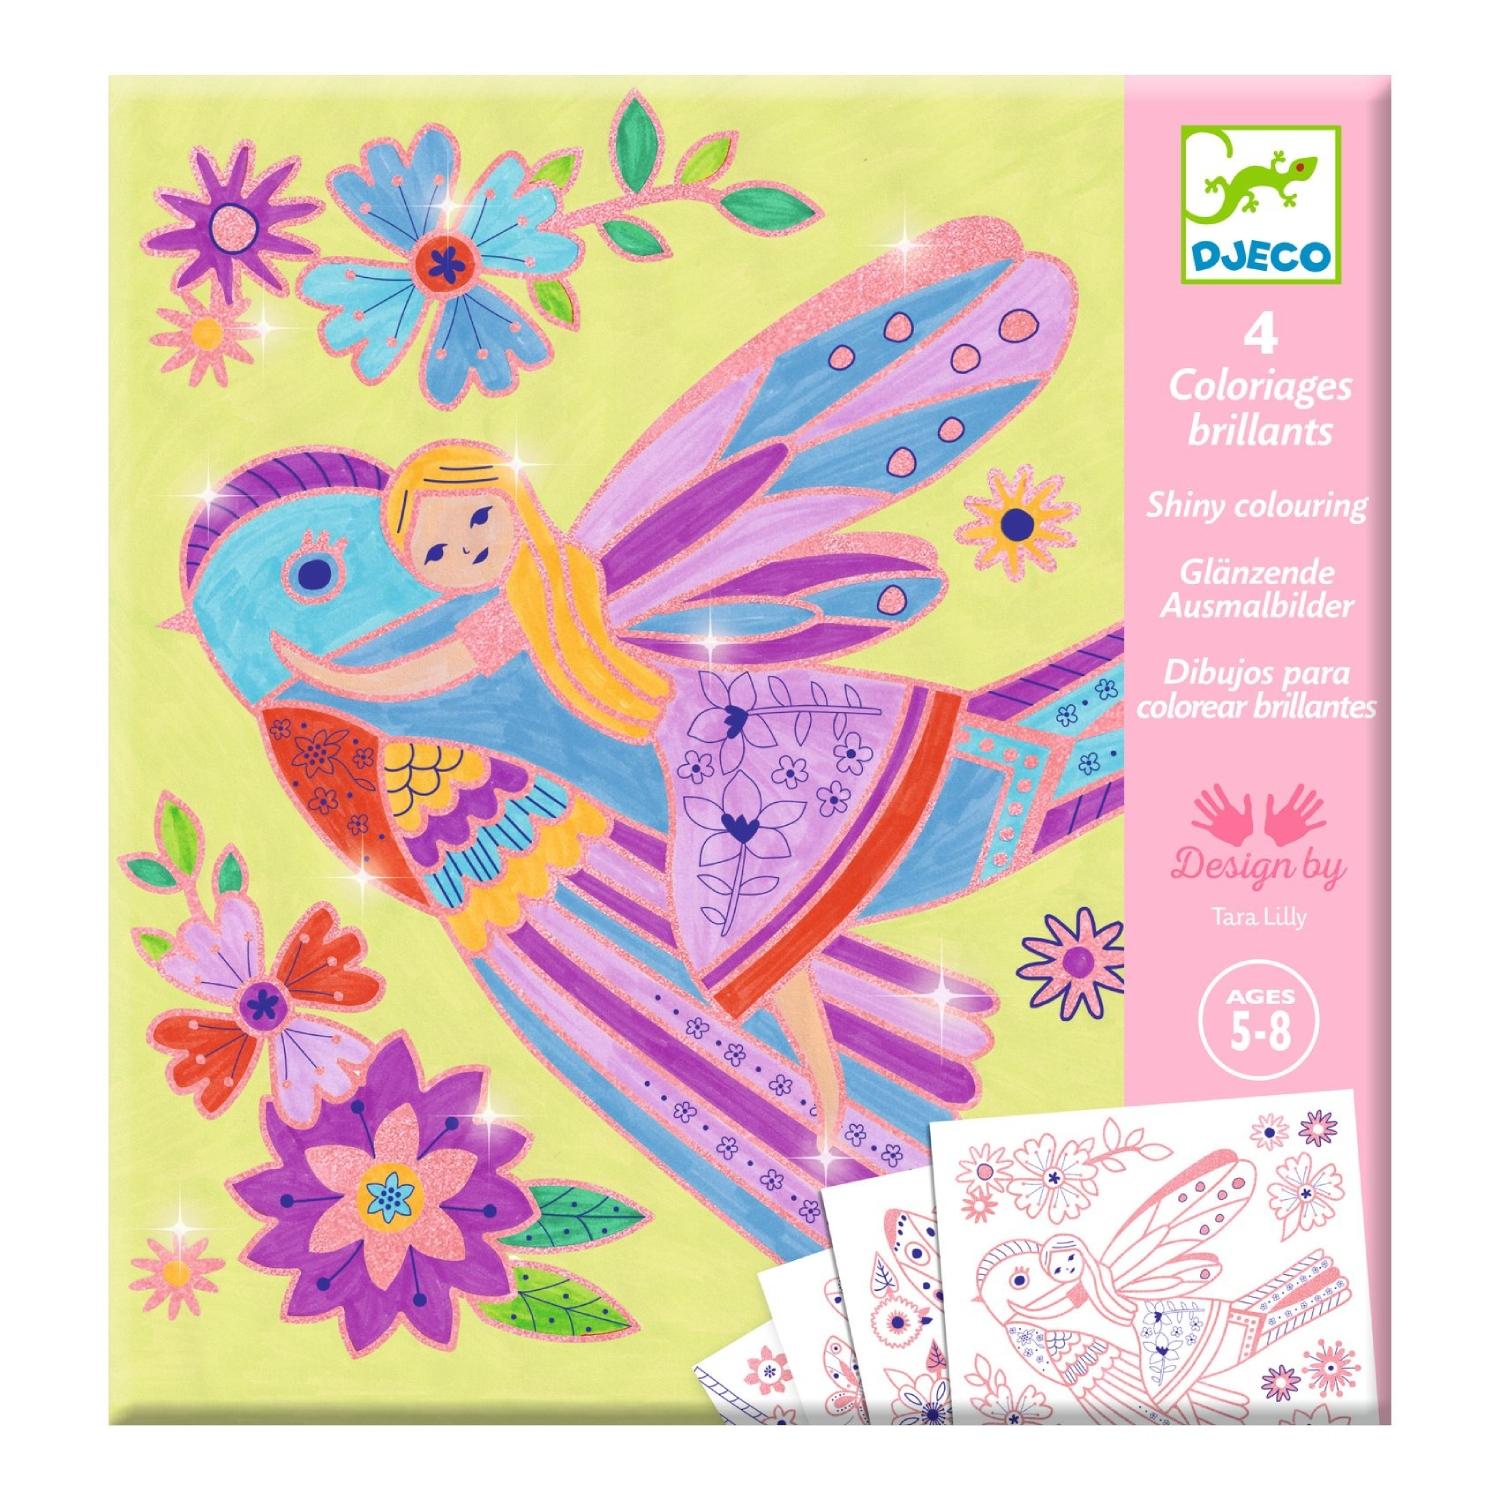 colouring surprises small wings by djeco